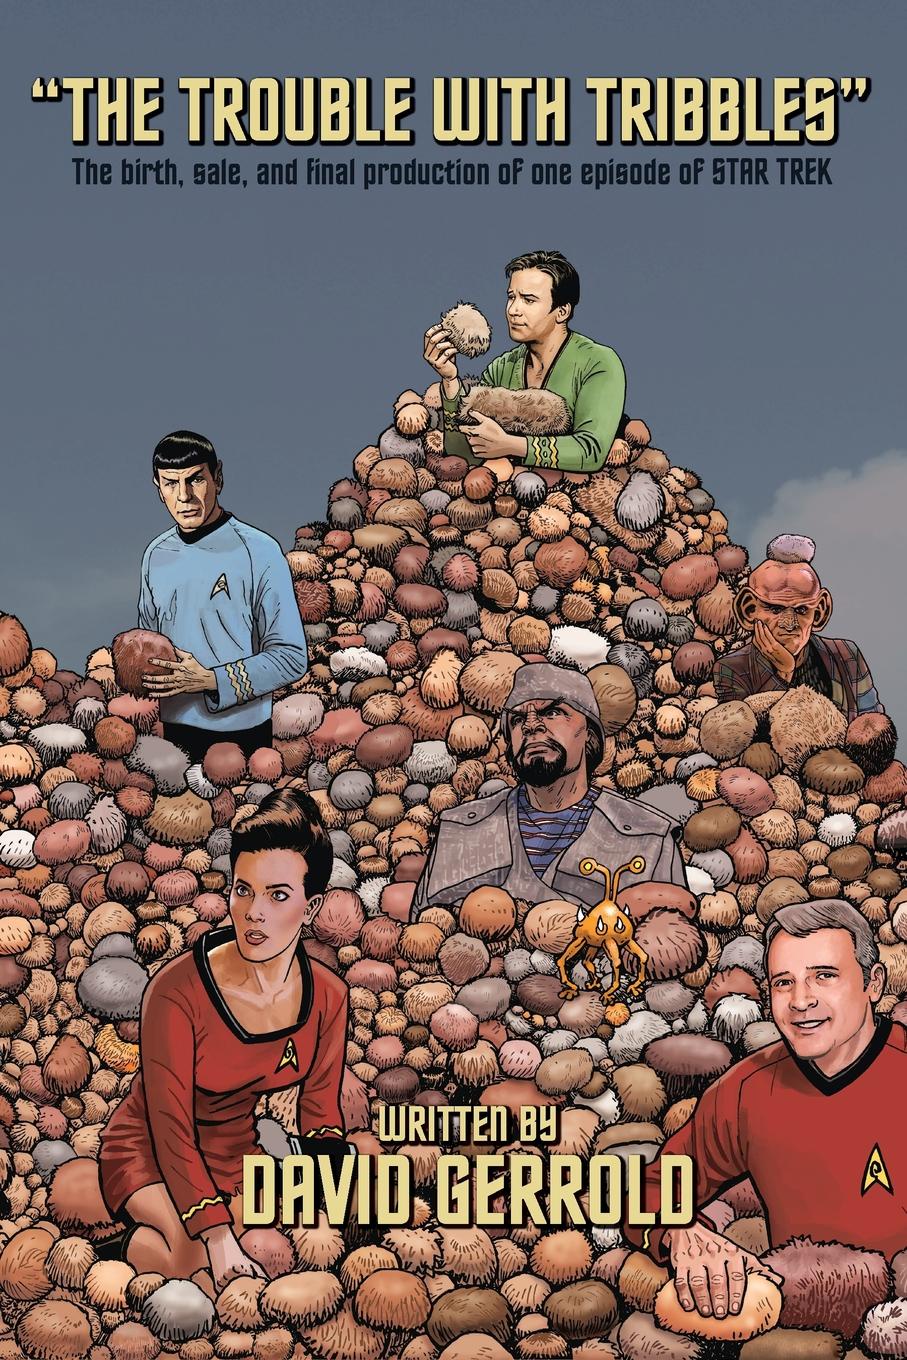 The Trouble With Tribbles. The Birth, Sale, and Final Production of One Episode of Star Trek